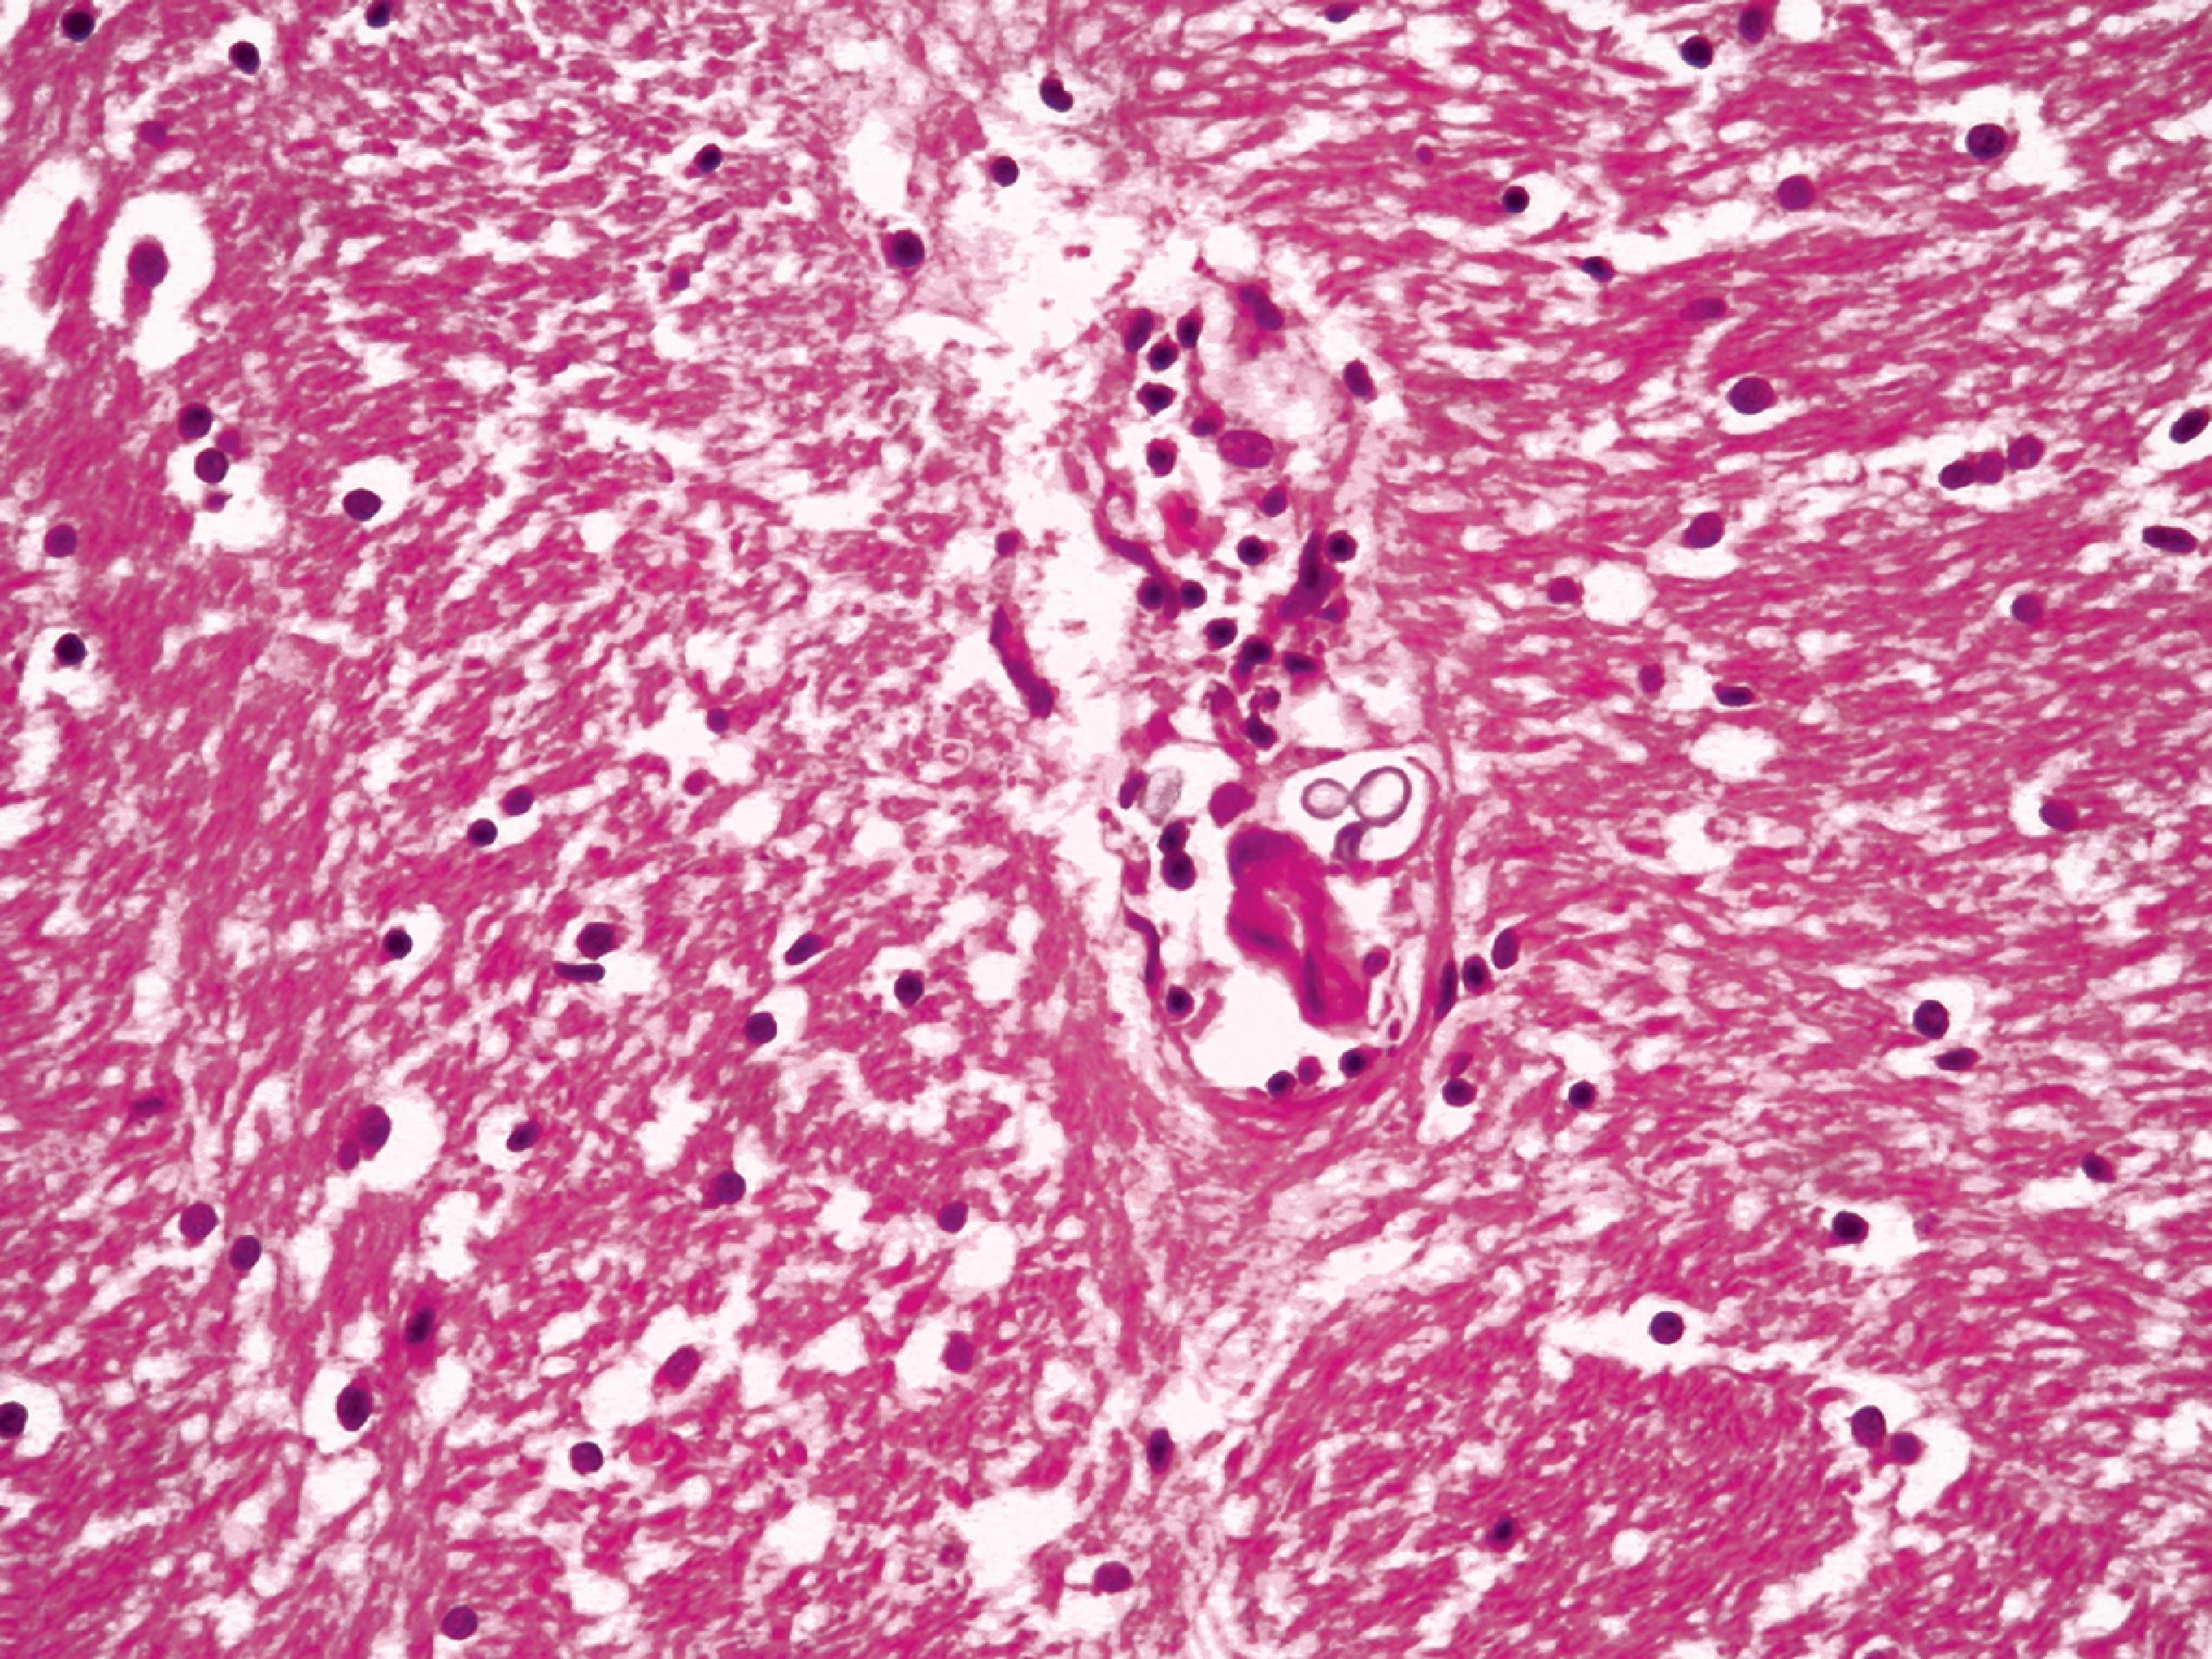 FIGURE 7.20, Cryptococcosis. The yeasts causing cryptococcosis are faintly staining and tend to cluster about blood vessels. Budding forms may be present.